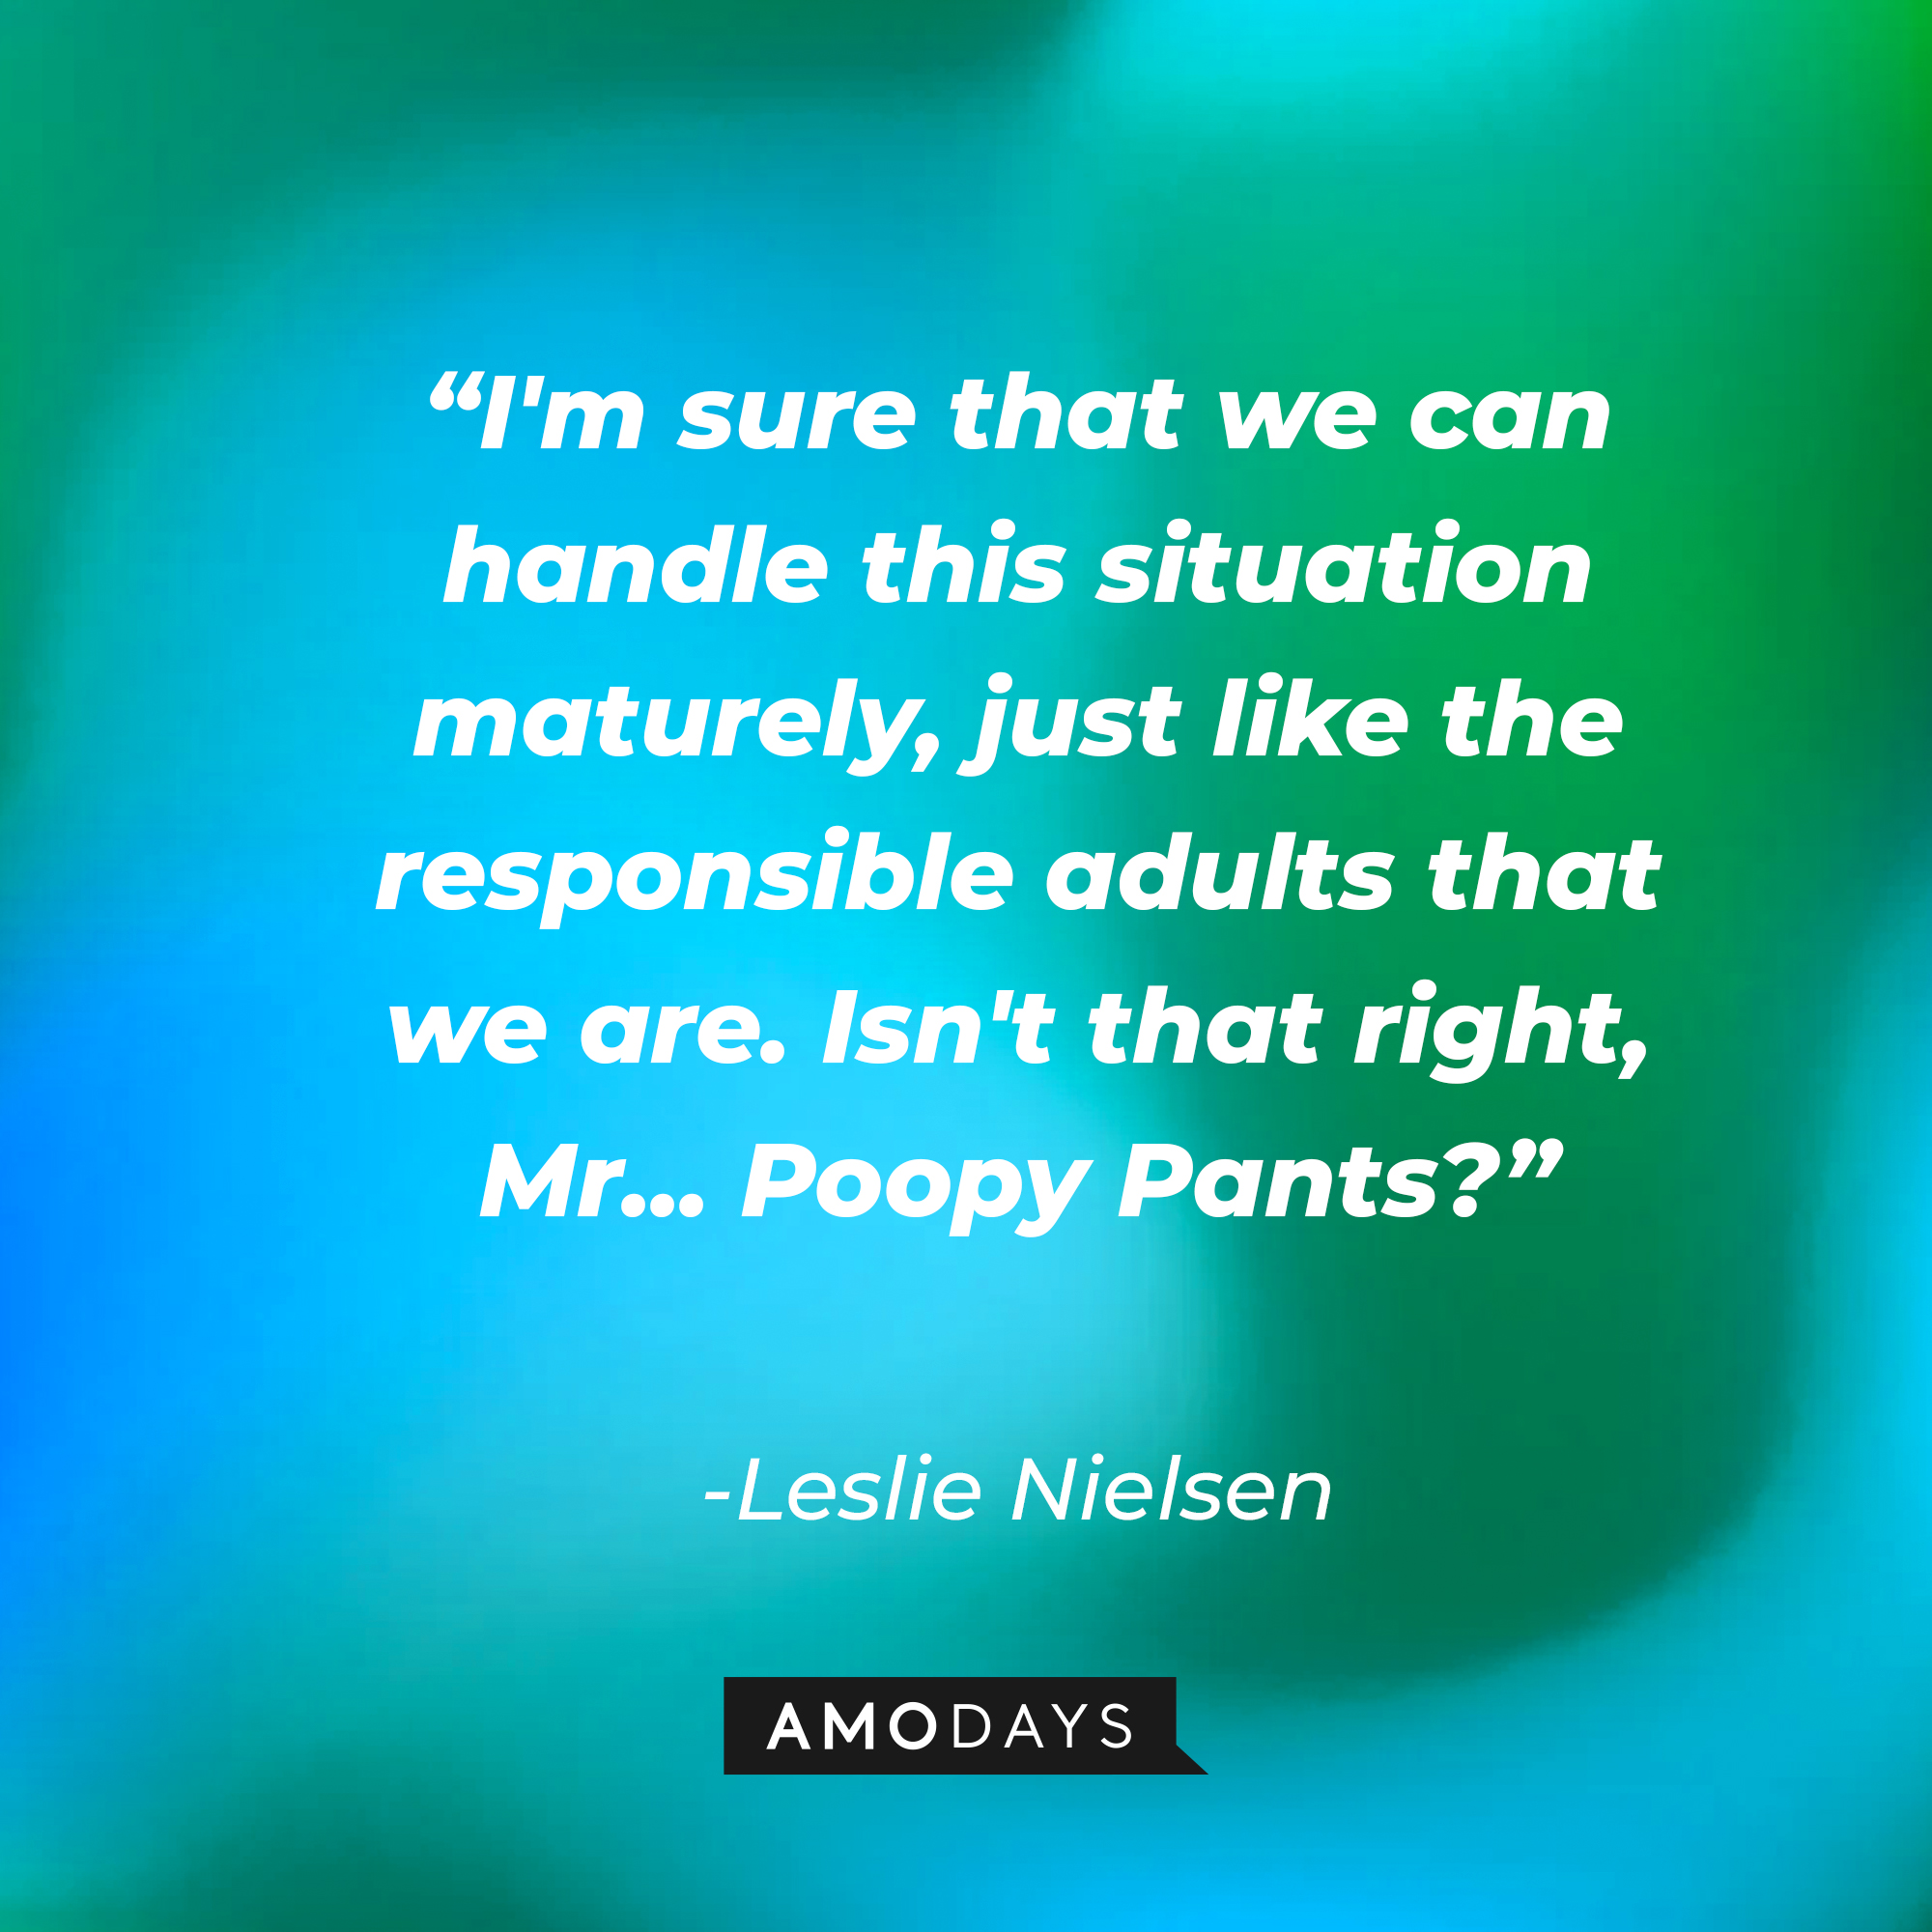 Leslie Nielsen's quote: “I'm sure that we can handle this situation maturely, just like the responsible adults that we are. Isn't that right, Mr... Poopy Pants?" | Source: Amodays